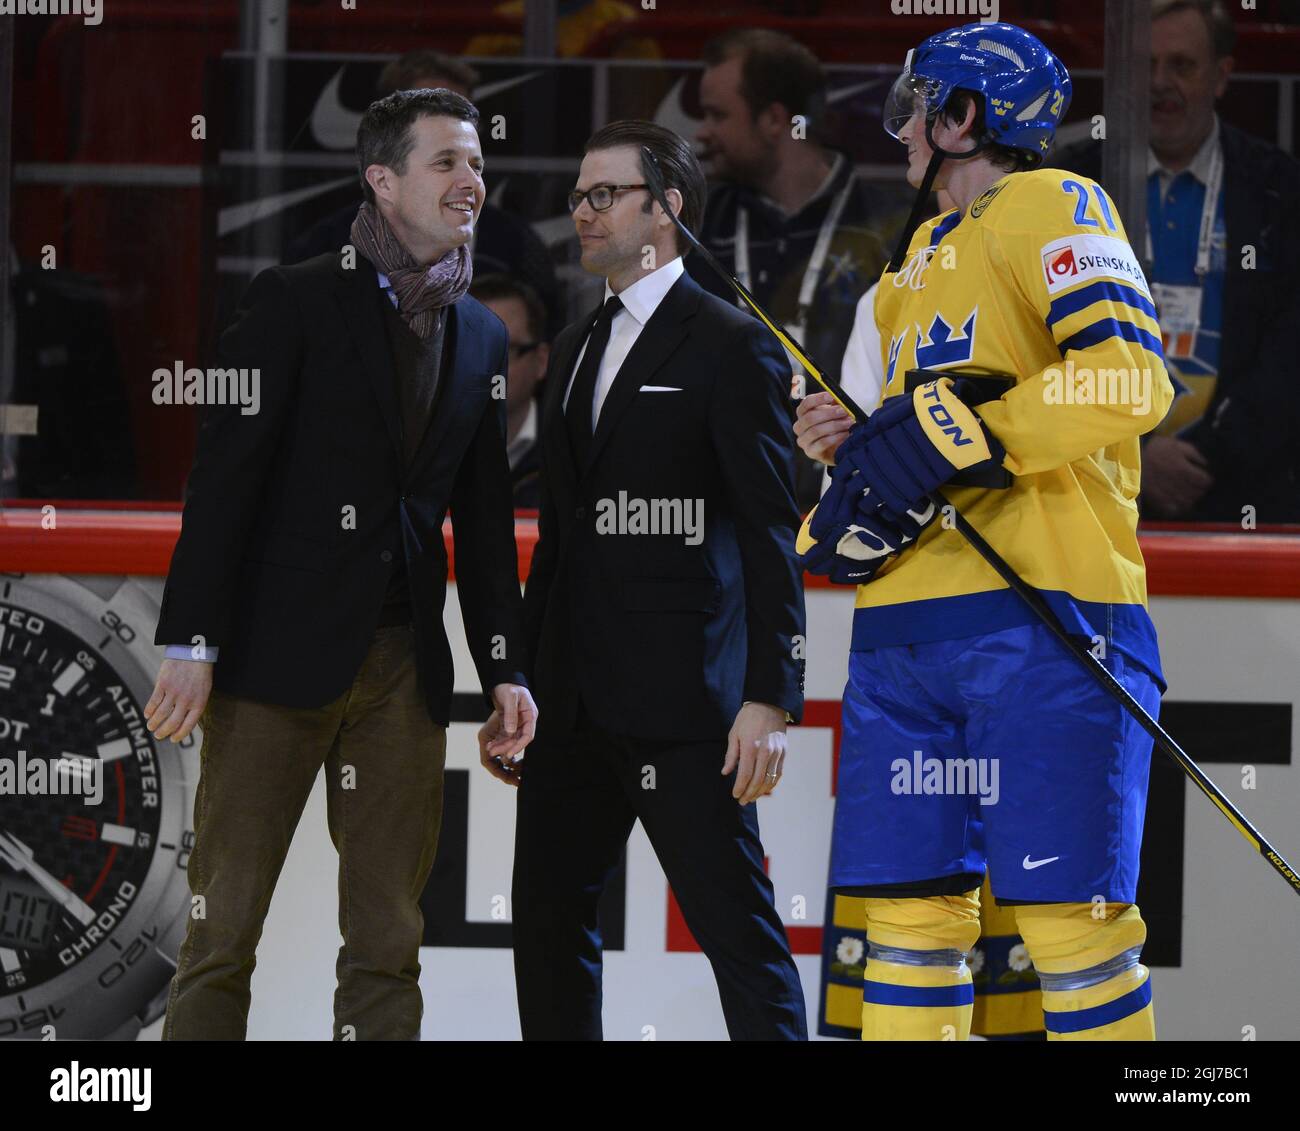 STOCKHOLM 2012-05-07 Swedish player Loui Eriksson receives the price Swedish best player of the match from Denmarks Crown Price Frederik and Sweden's Price Daniel after the ice hockey game between Denmark and Sweden during the 2012 IIHF men's ice hockey World Championship in Stockholm May 7, 2012. Foto Claudio Bresciani  / SCANPIX / kod 10090 Stock Photo